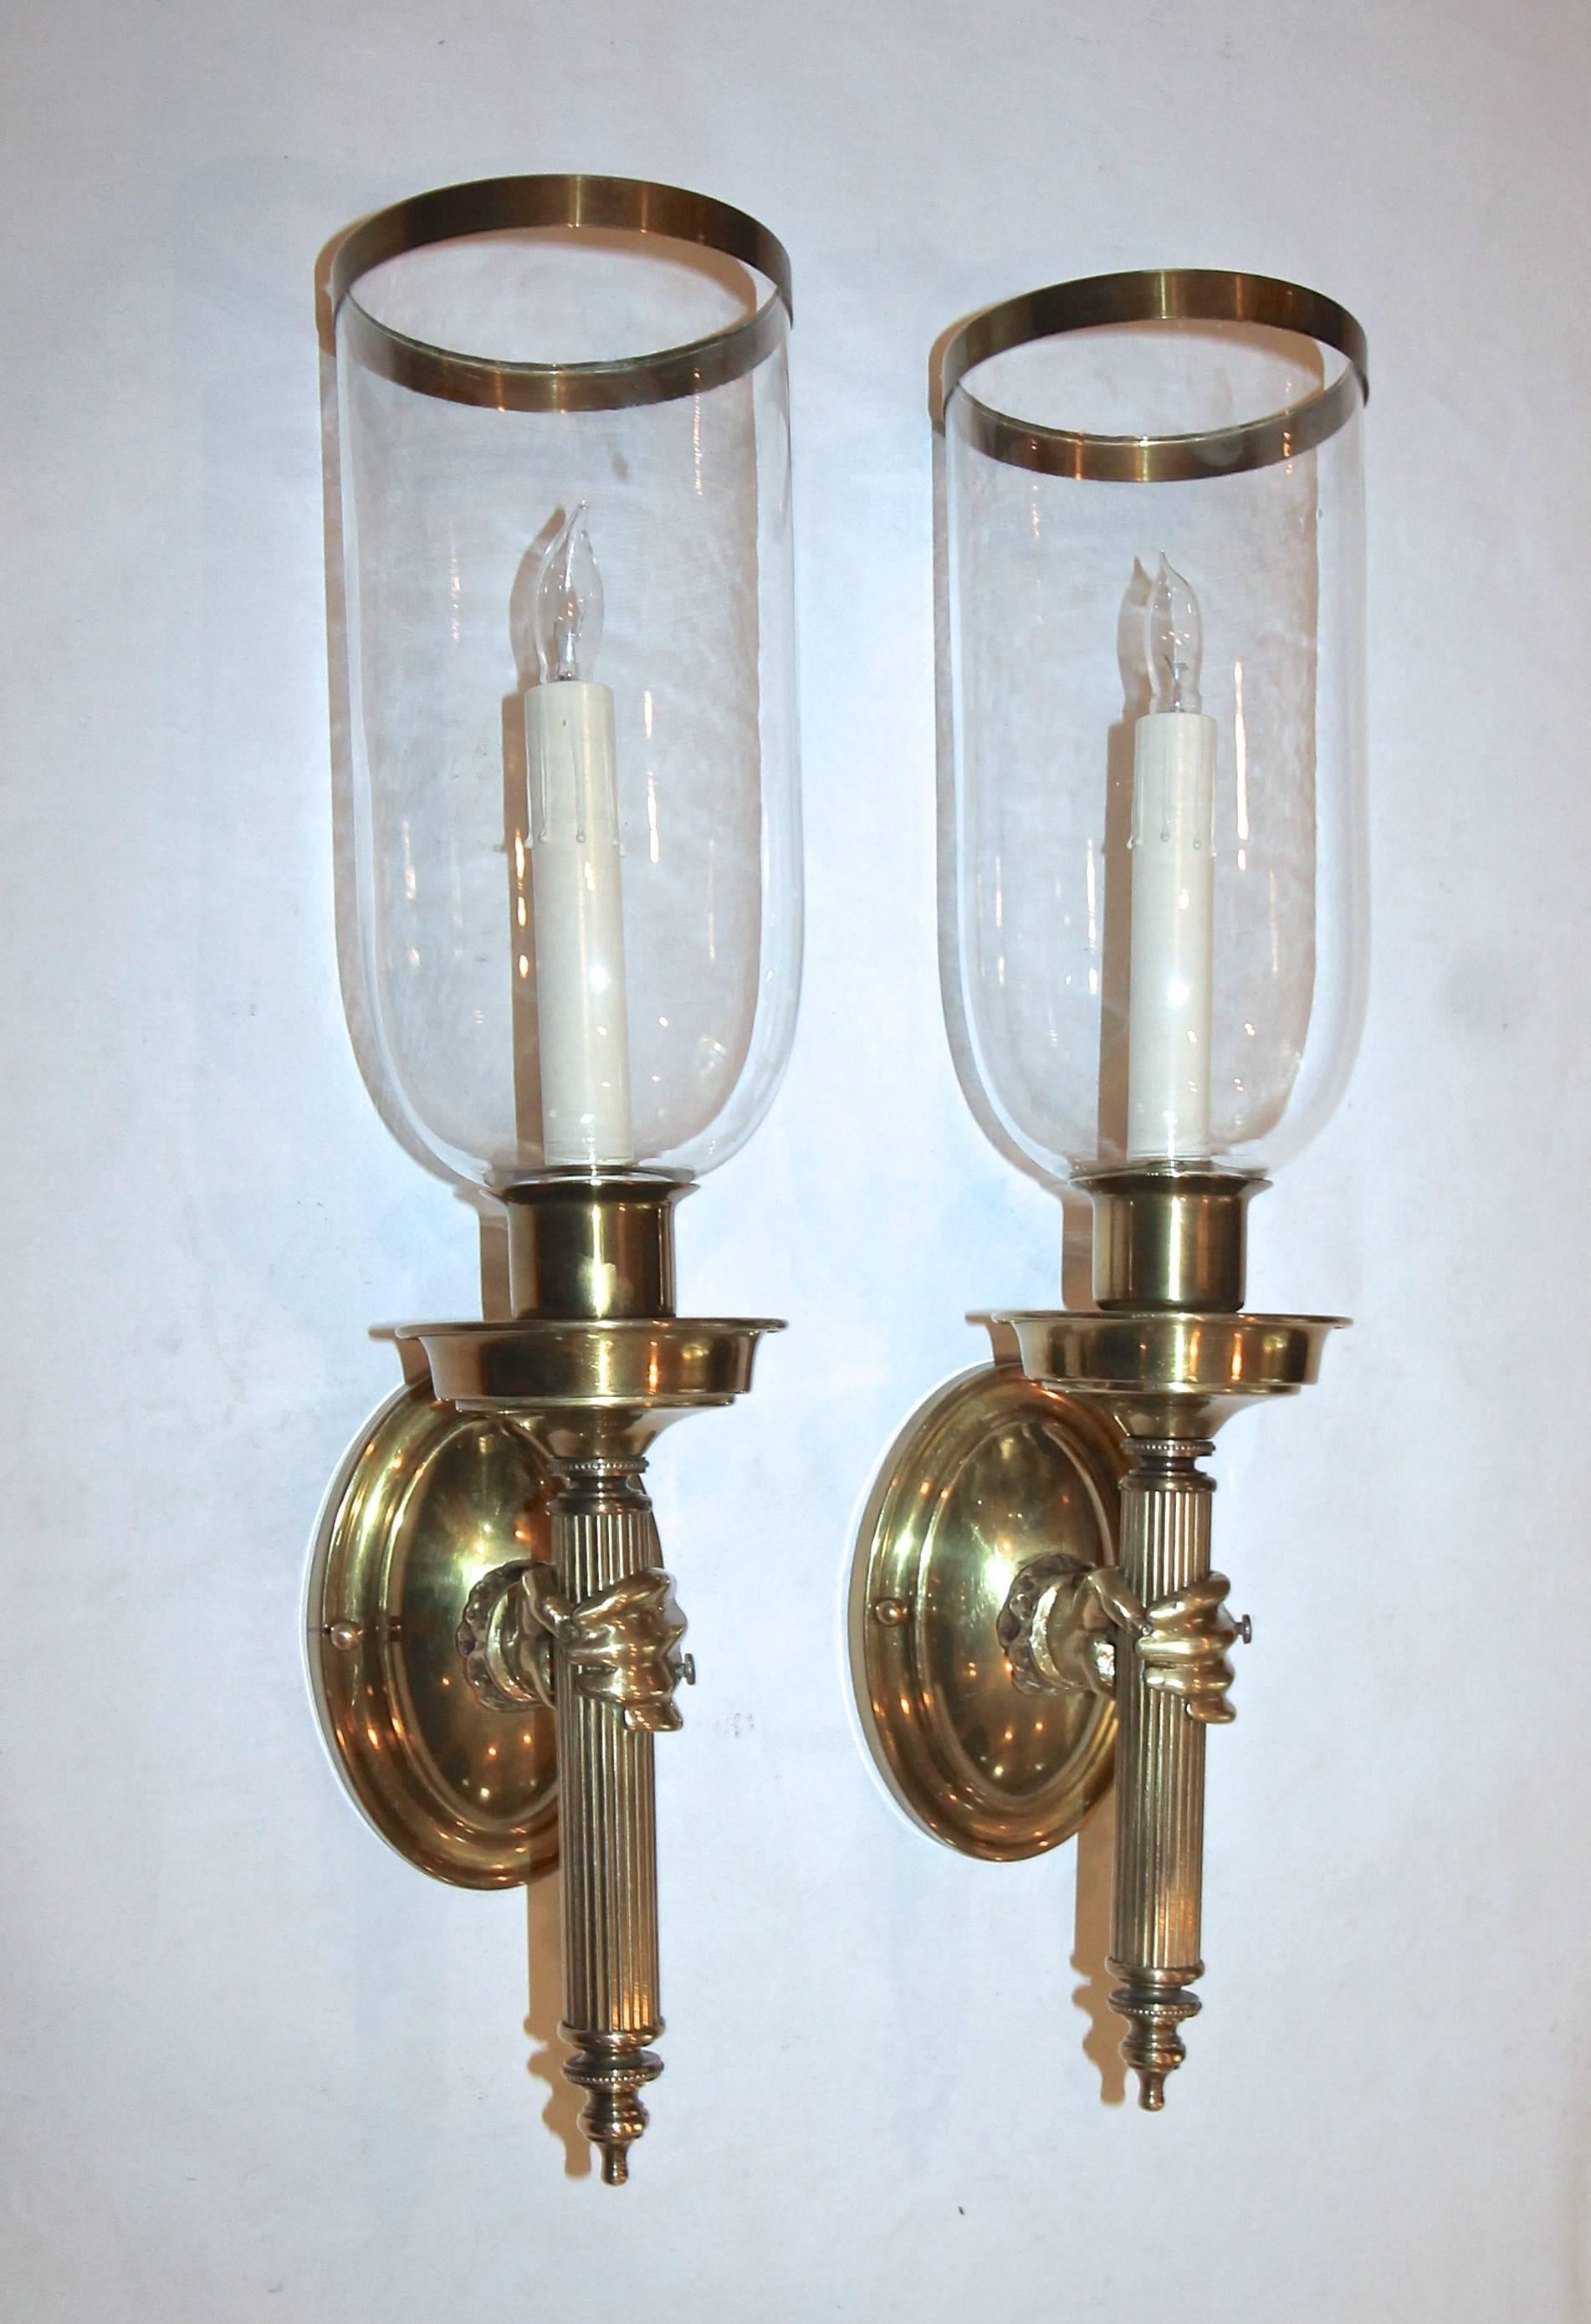 Pair of brass wall sconces of hands holding a torch. Large glass shades with brass outer rim included. Each sconce uses 1-40 watt max candelabra base bulb. Newly wired. Measure: Height without glass shade 16